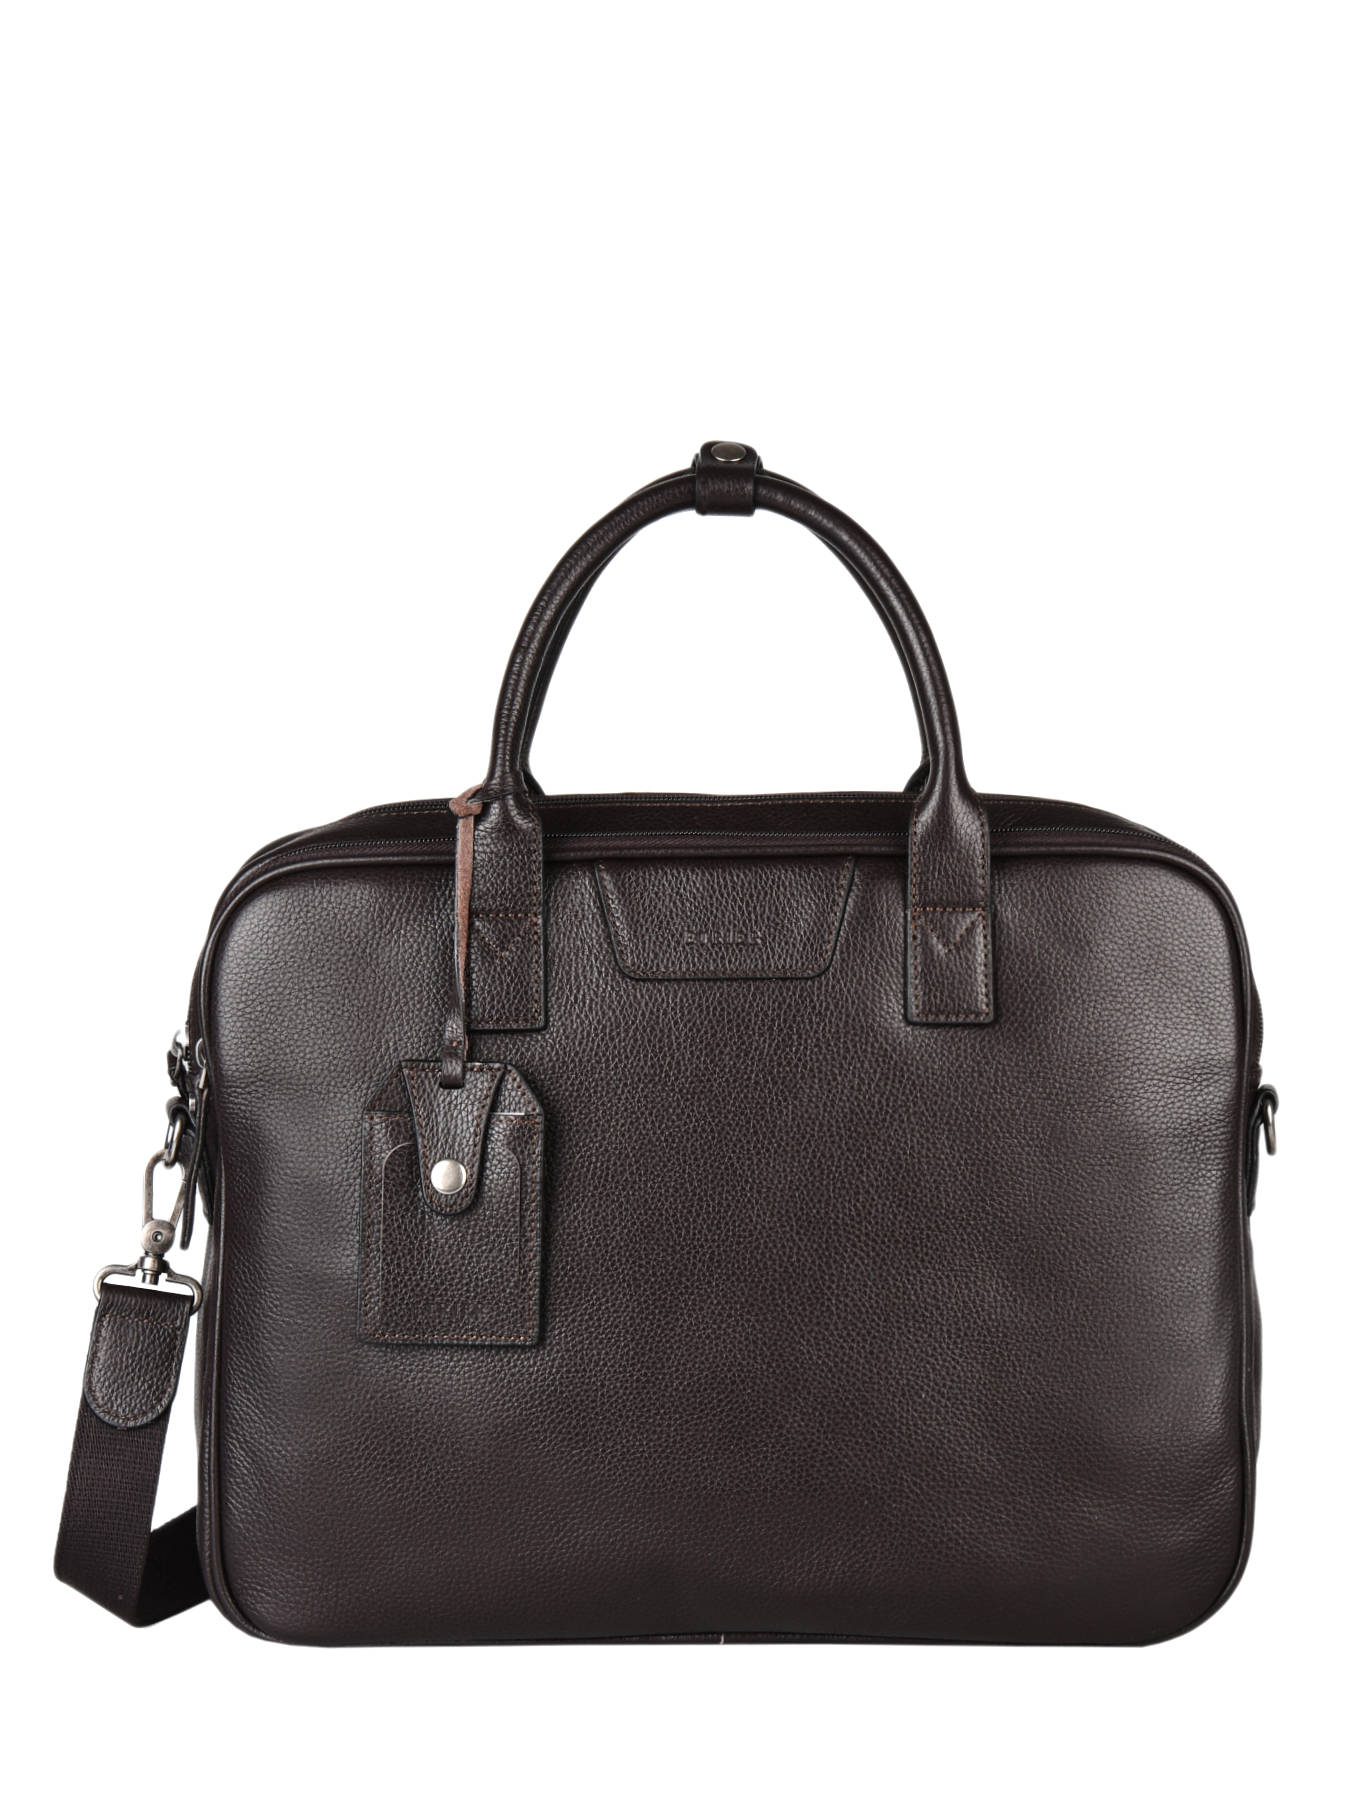 Porte-documents tradition cuir